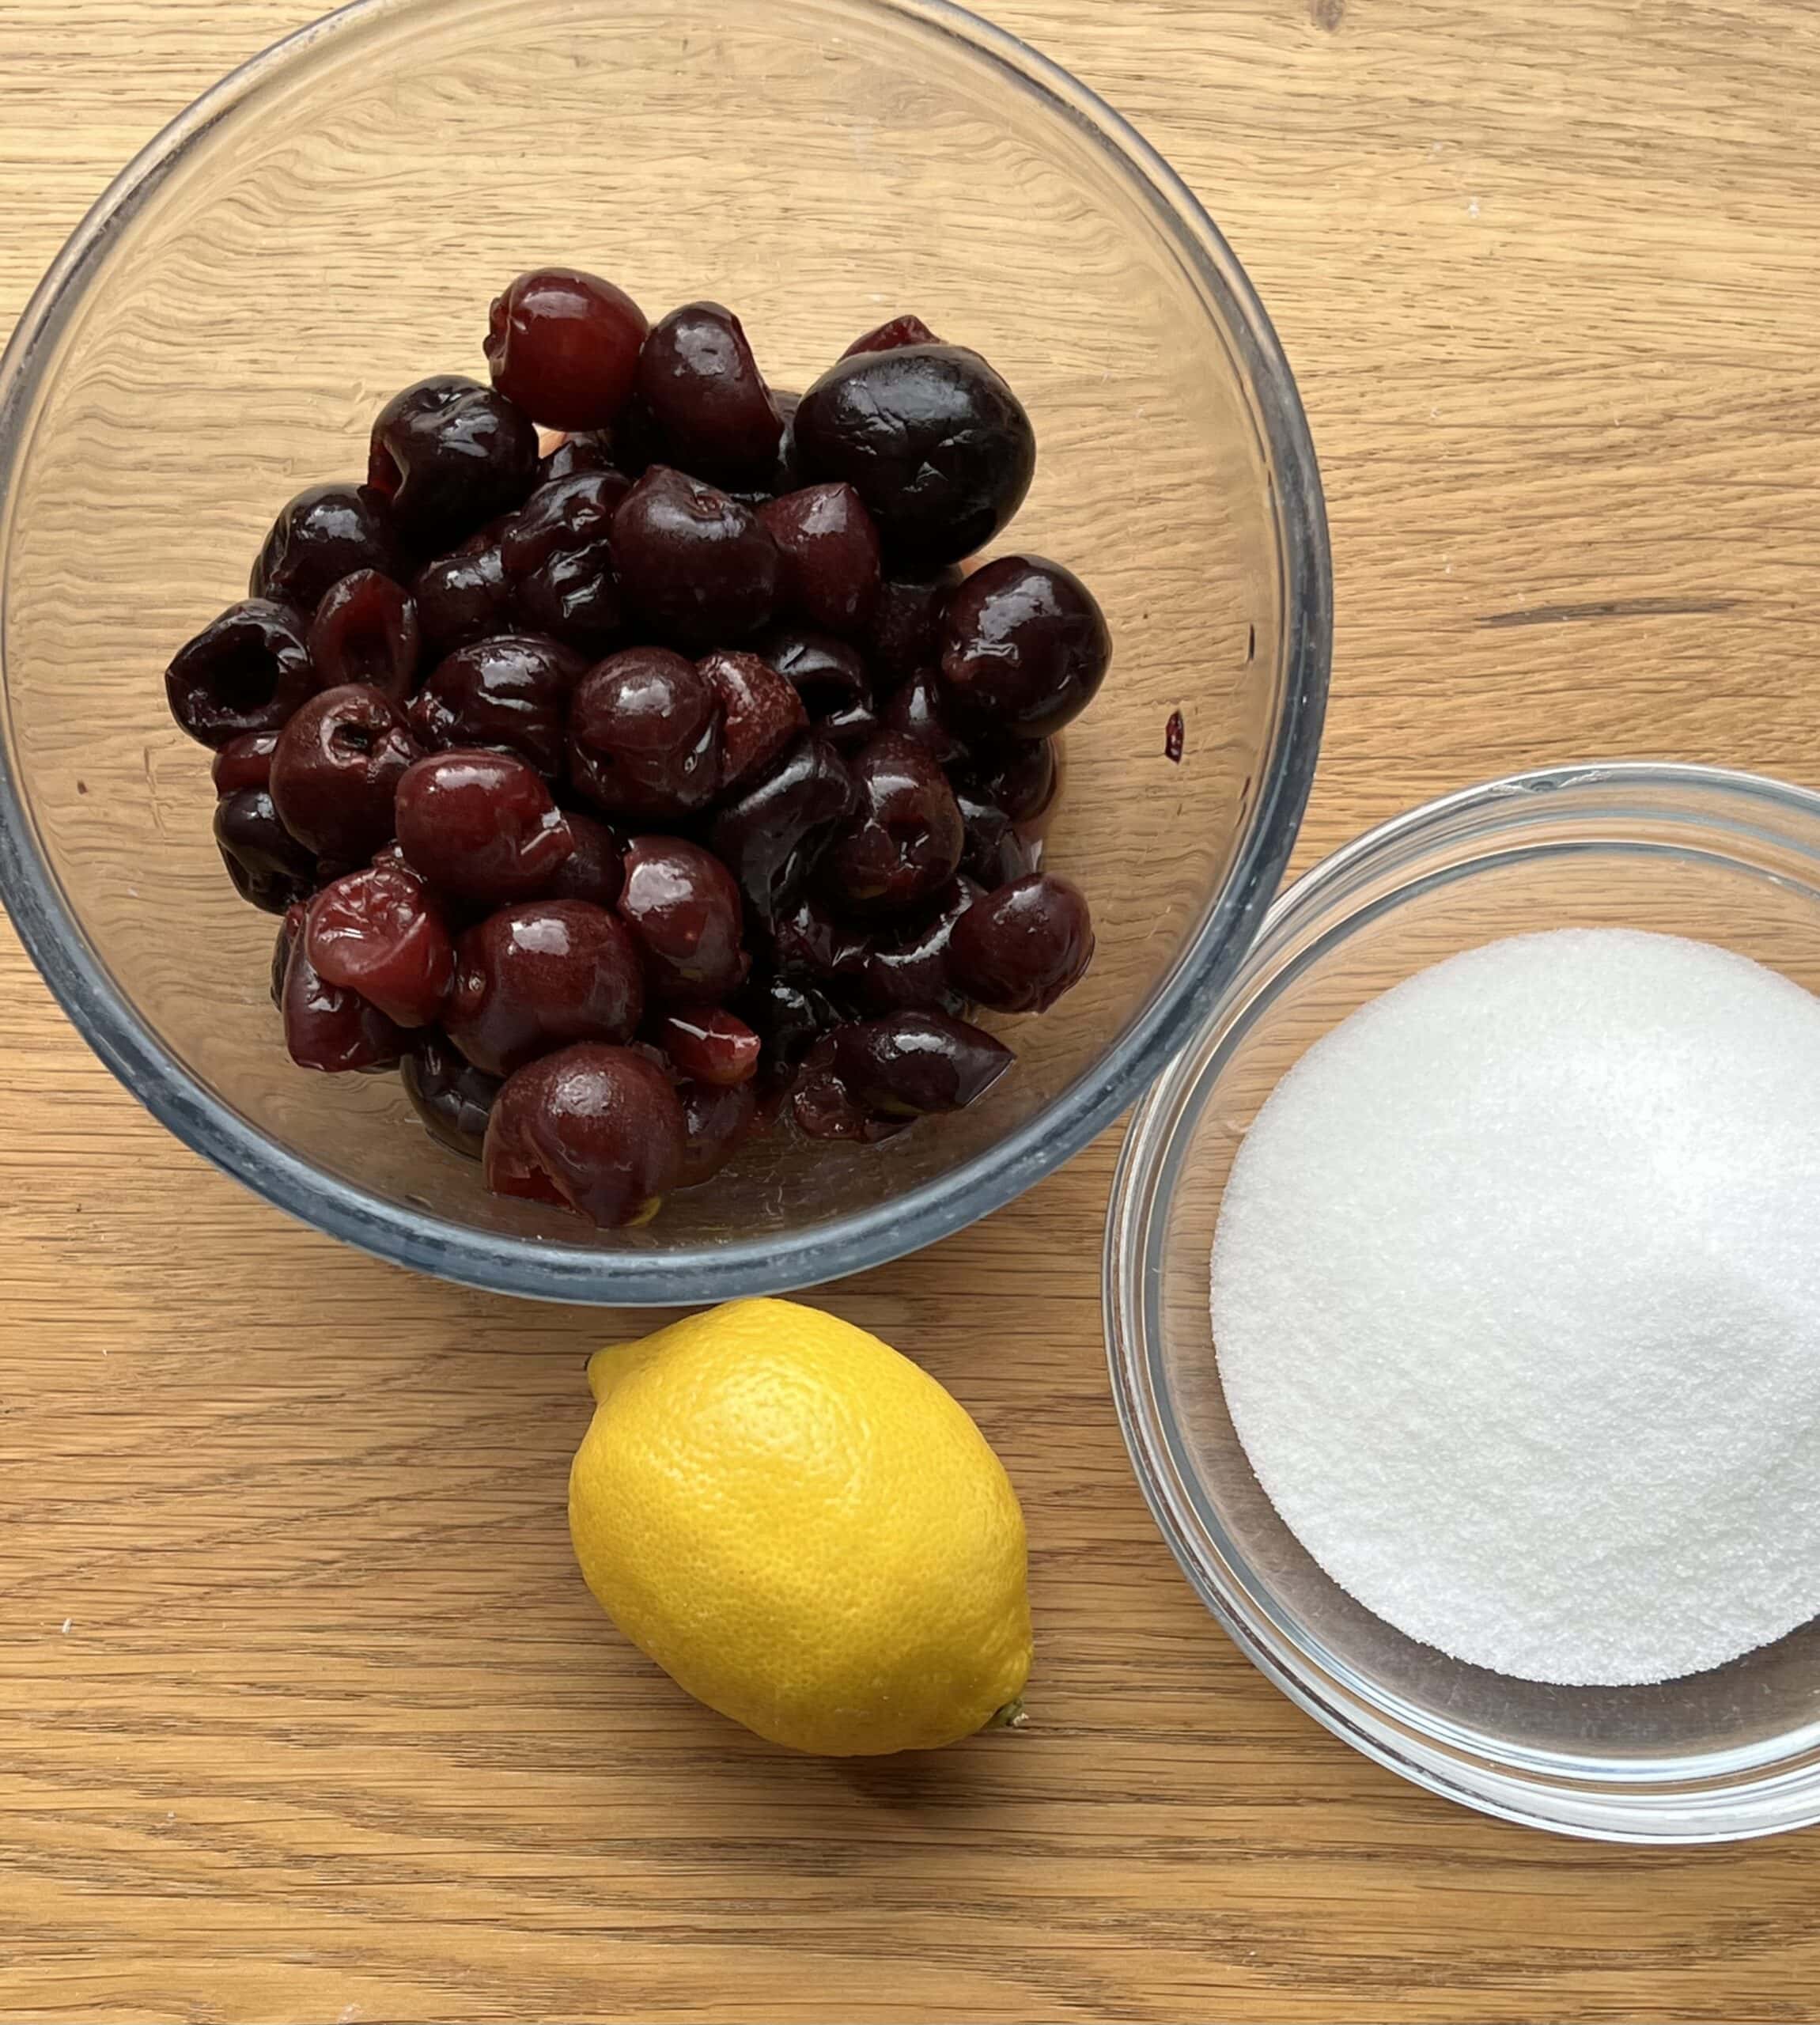 Bowls of cherries, sugar and a lemon on wooden counter.